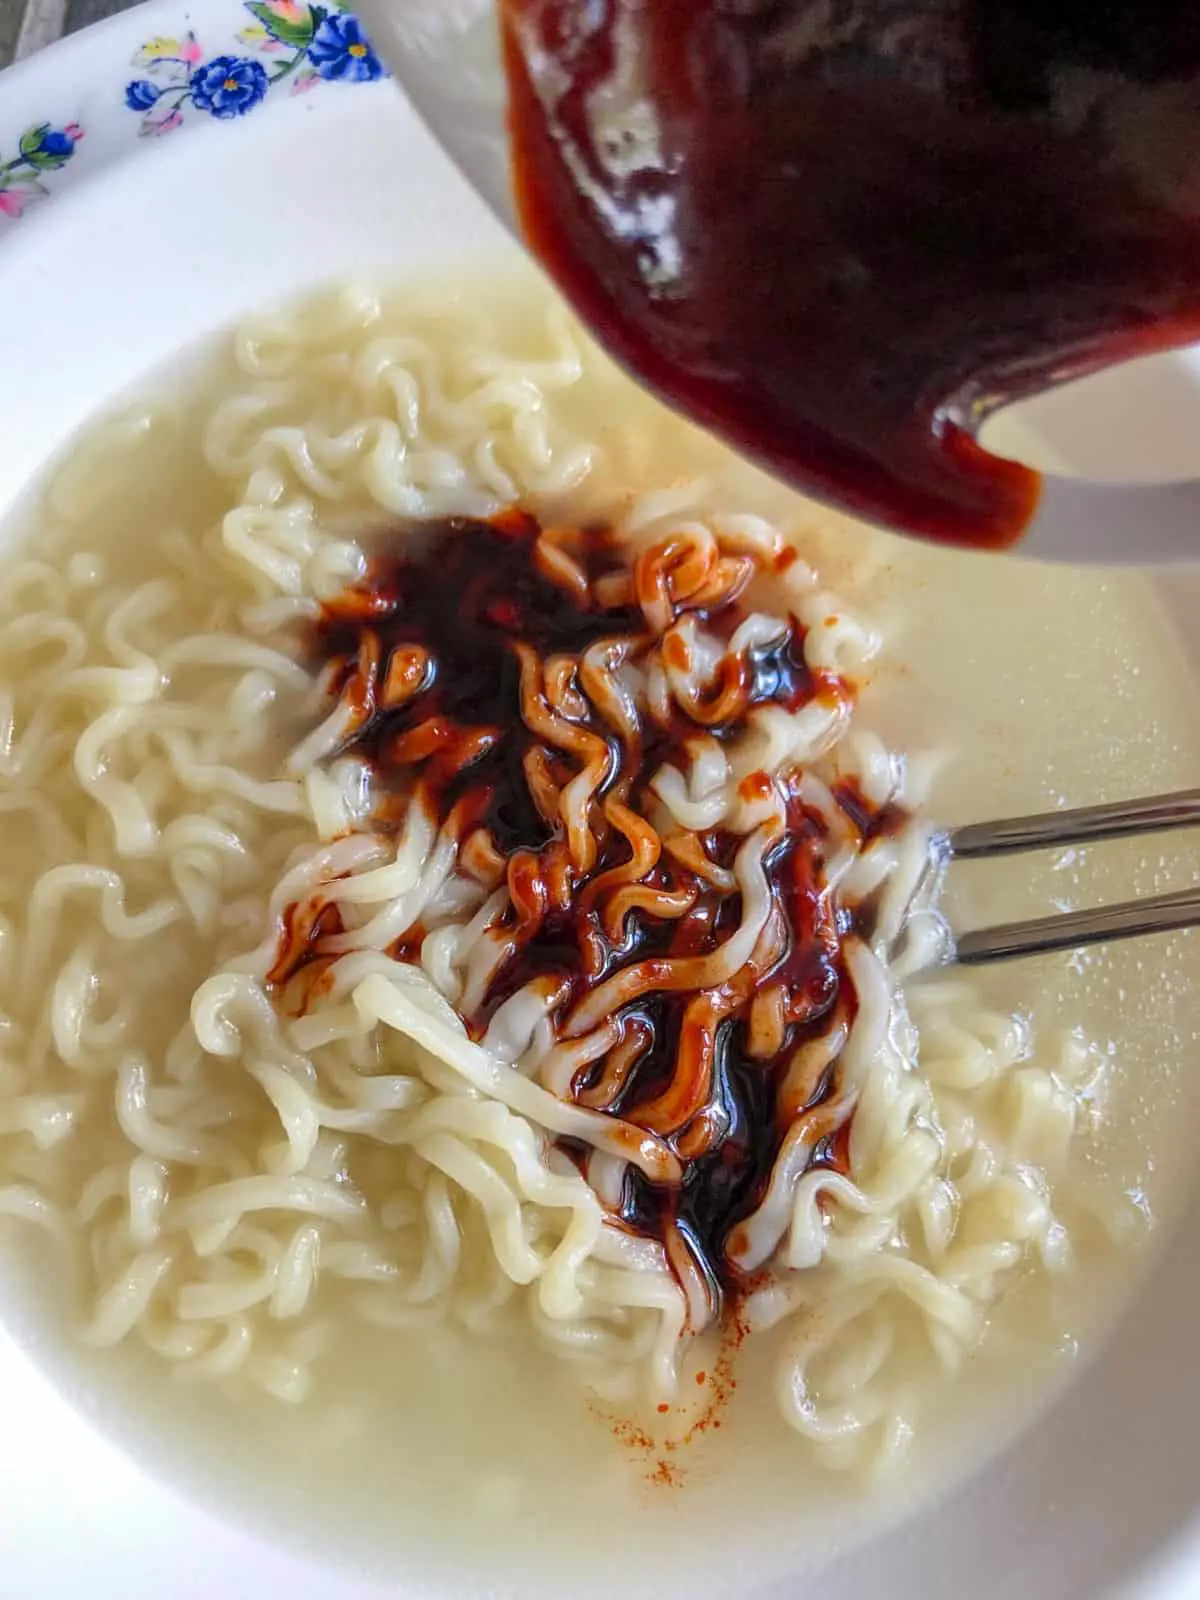 Noodles in starchy water in a white bowl patterned with blue flowers with spicy red sauce that has been added to the top of the noodles and a set of silver chopsticks.